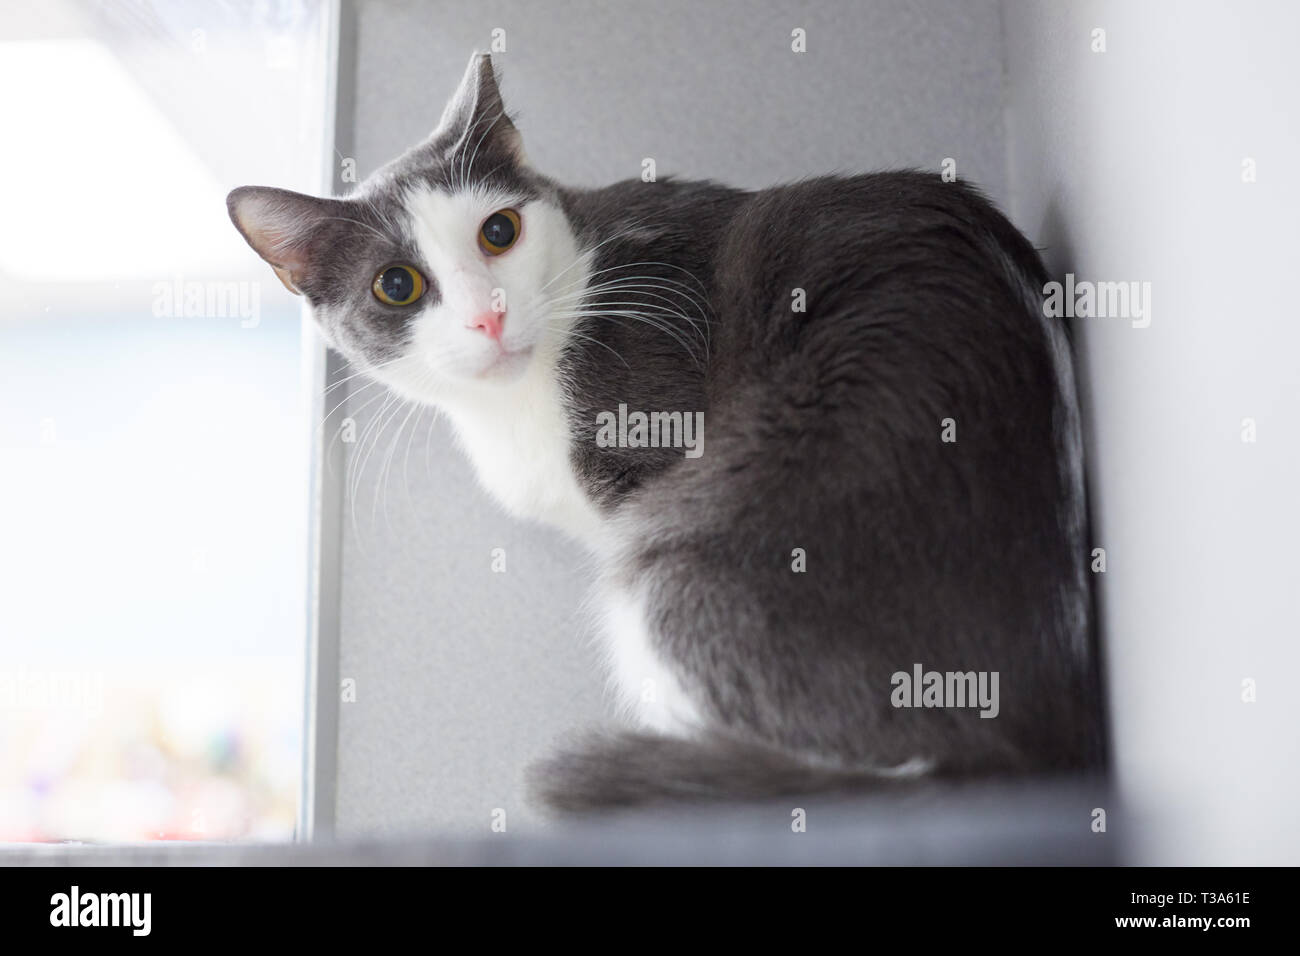 A gray and white cat is sitting on a shelf by a window and curiously looking toward camera Stock Photo